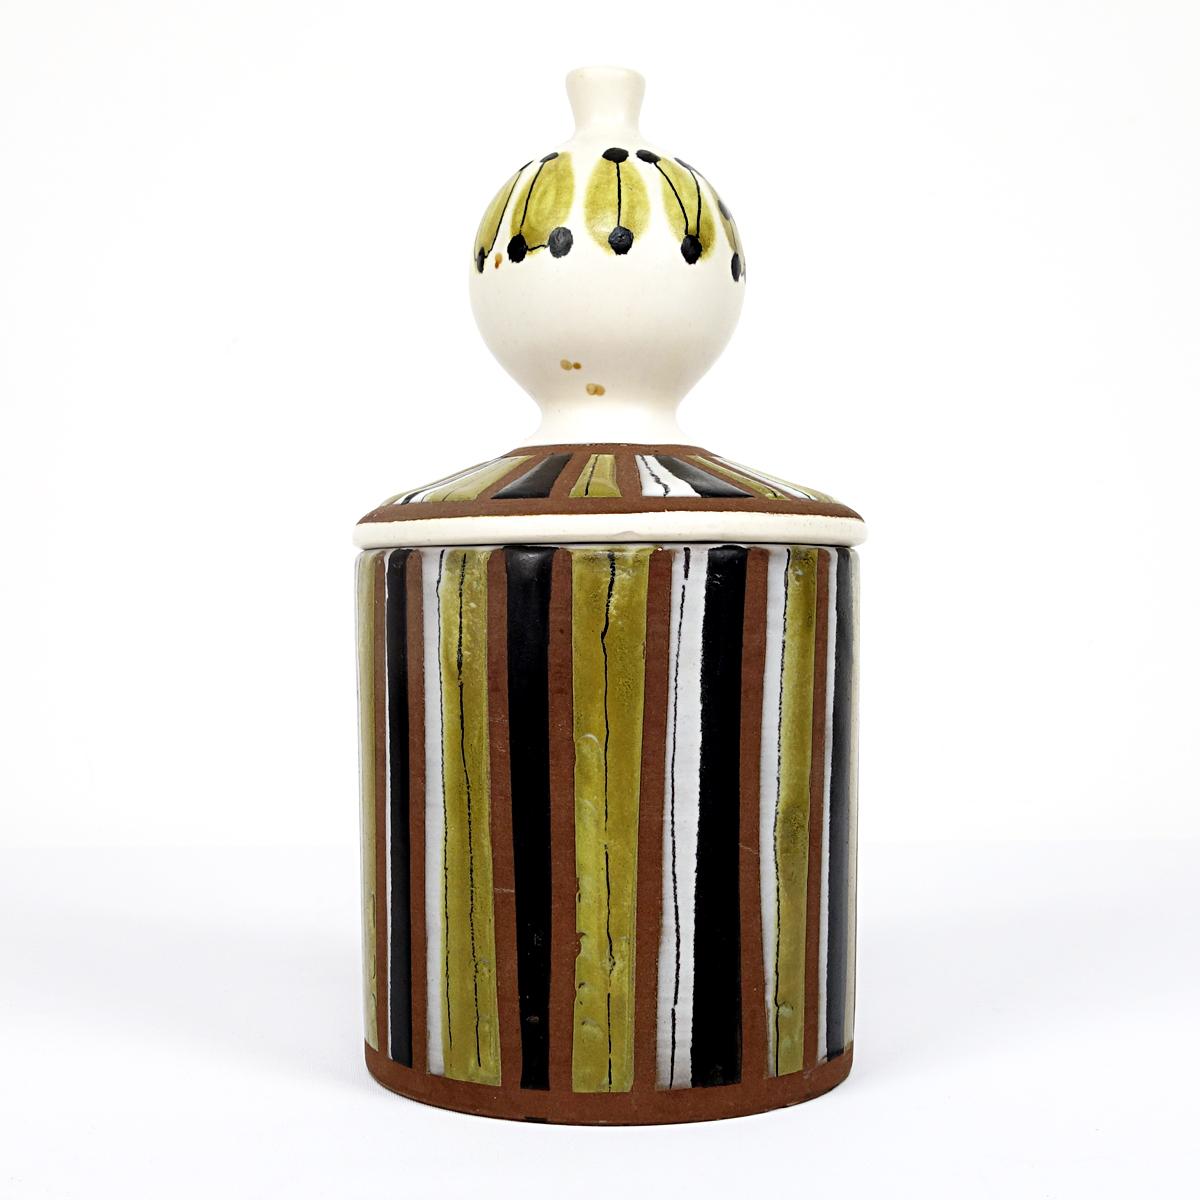 Beautiful Jar made by Roger Capron for Vallauris. The warm earthy colors and the freestyle shapes (especially that of the lid) makes this outstanding piece like candy to the eye.